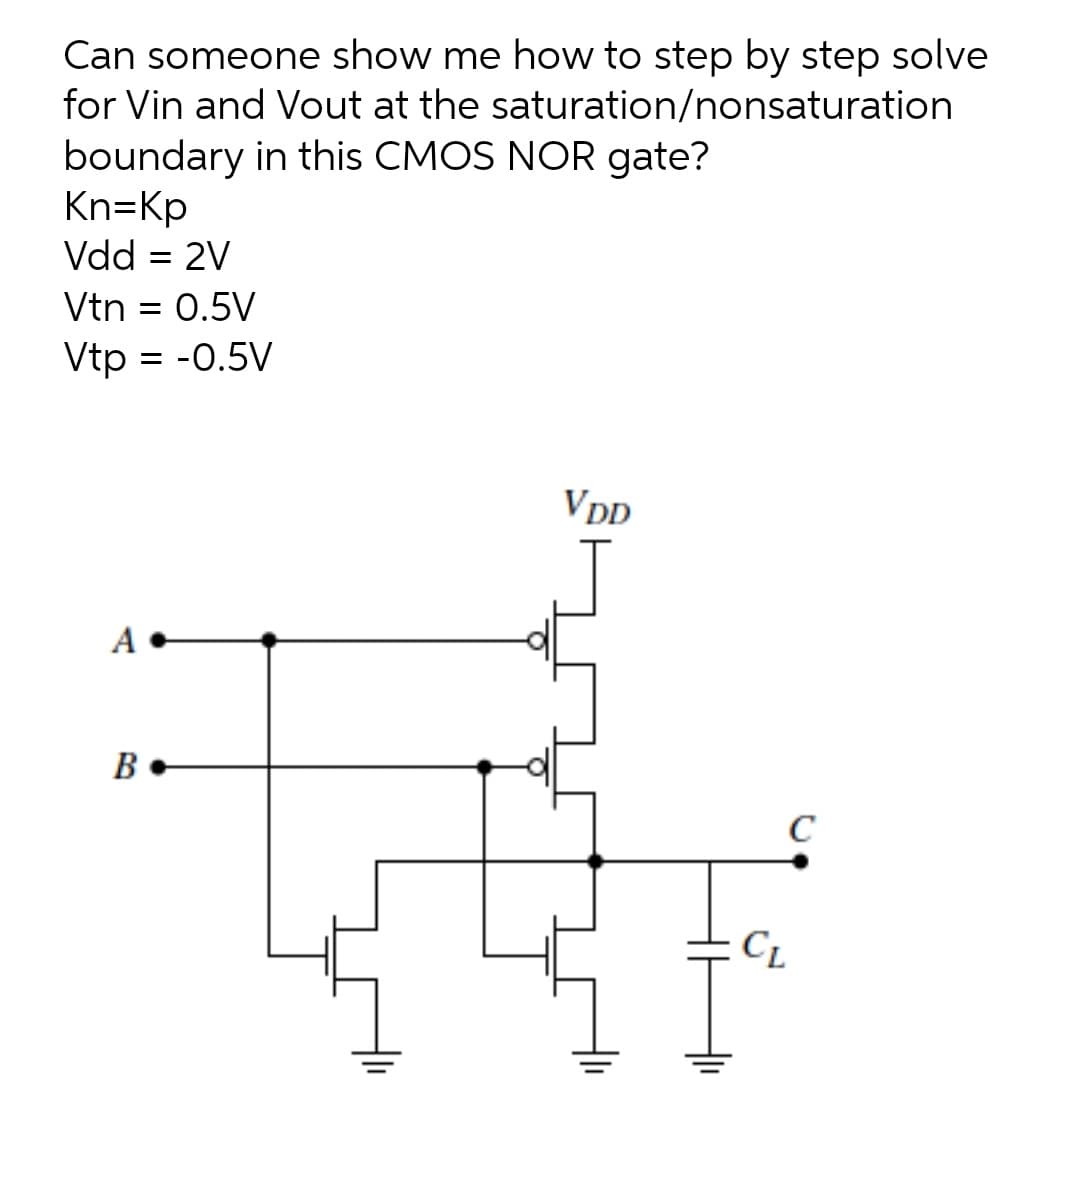 Can someone show me how to step by step solve
for Vin and Vout at the saturation/nonsaturation
boundary in this CMOS NOR gate?
Kn=Kp
Vdd = 2V
Vtn = 0.5V
Vtp = -0.5V
VDD
A
B
C
